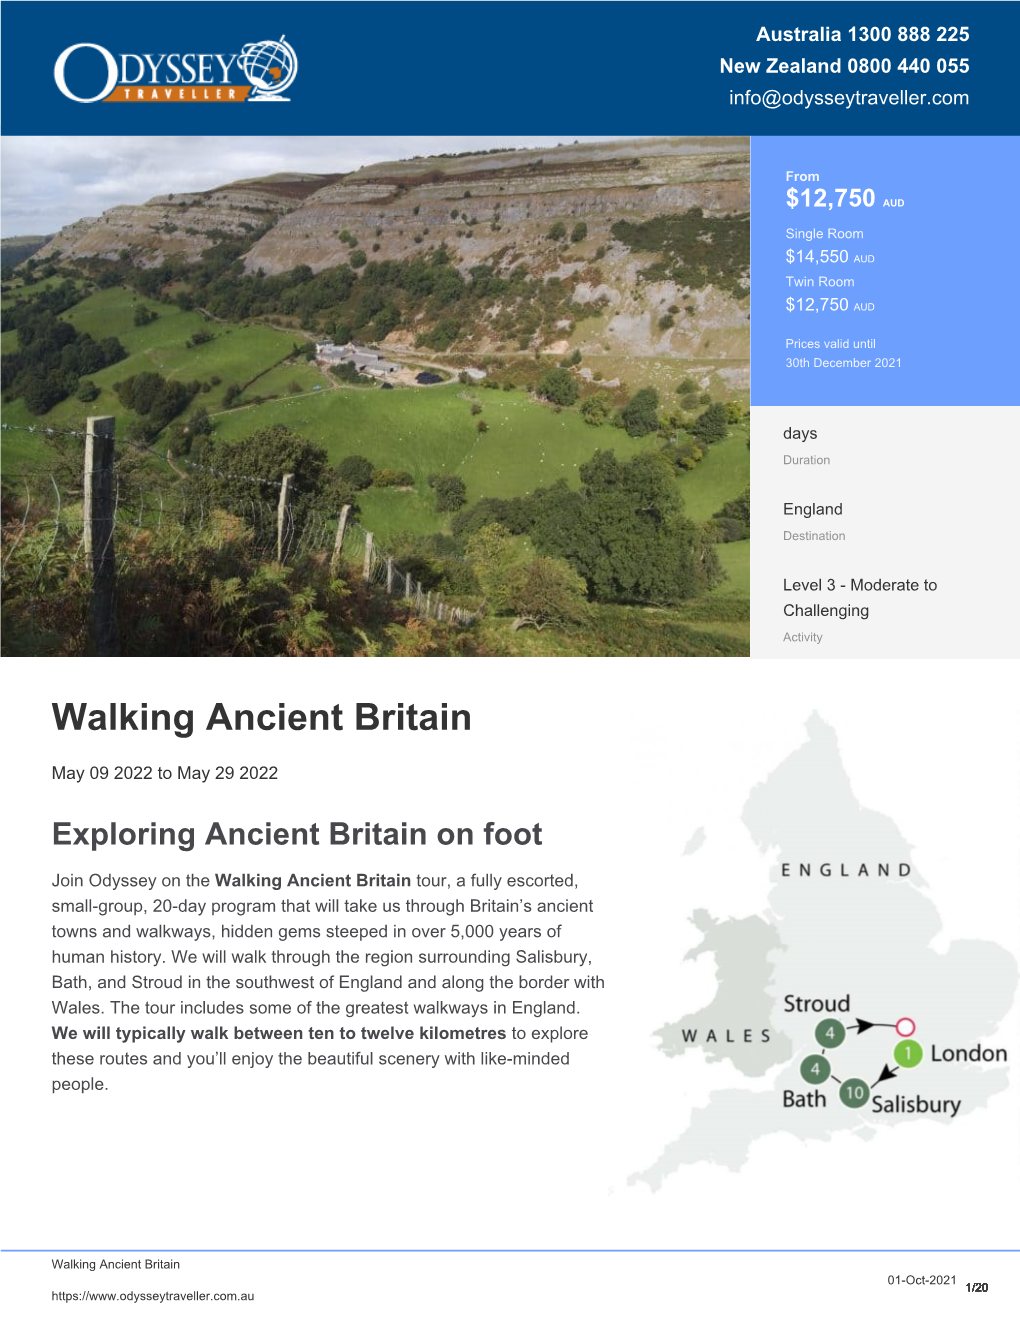 Walking Ancient Britain | Small Group Walking Tour | Odyssey Traveller